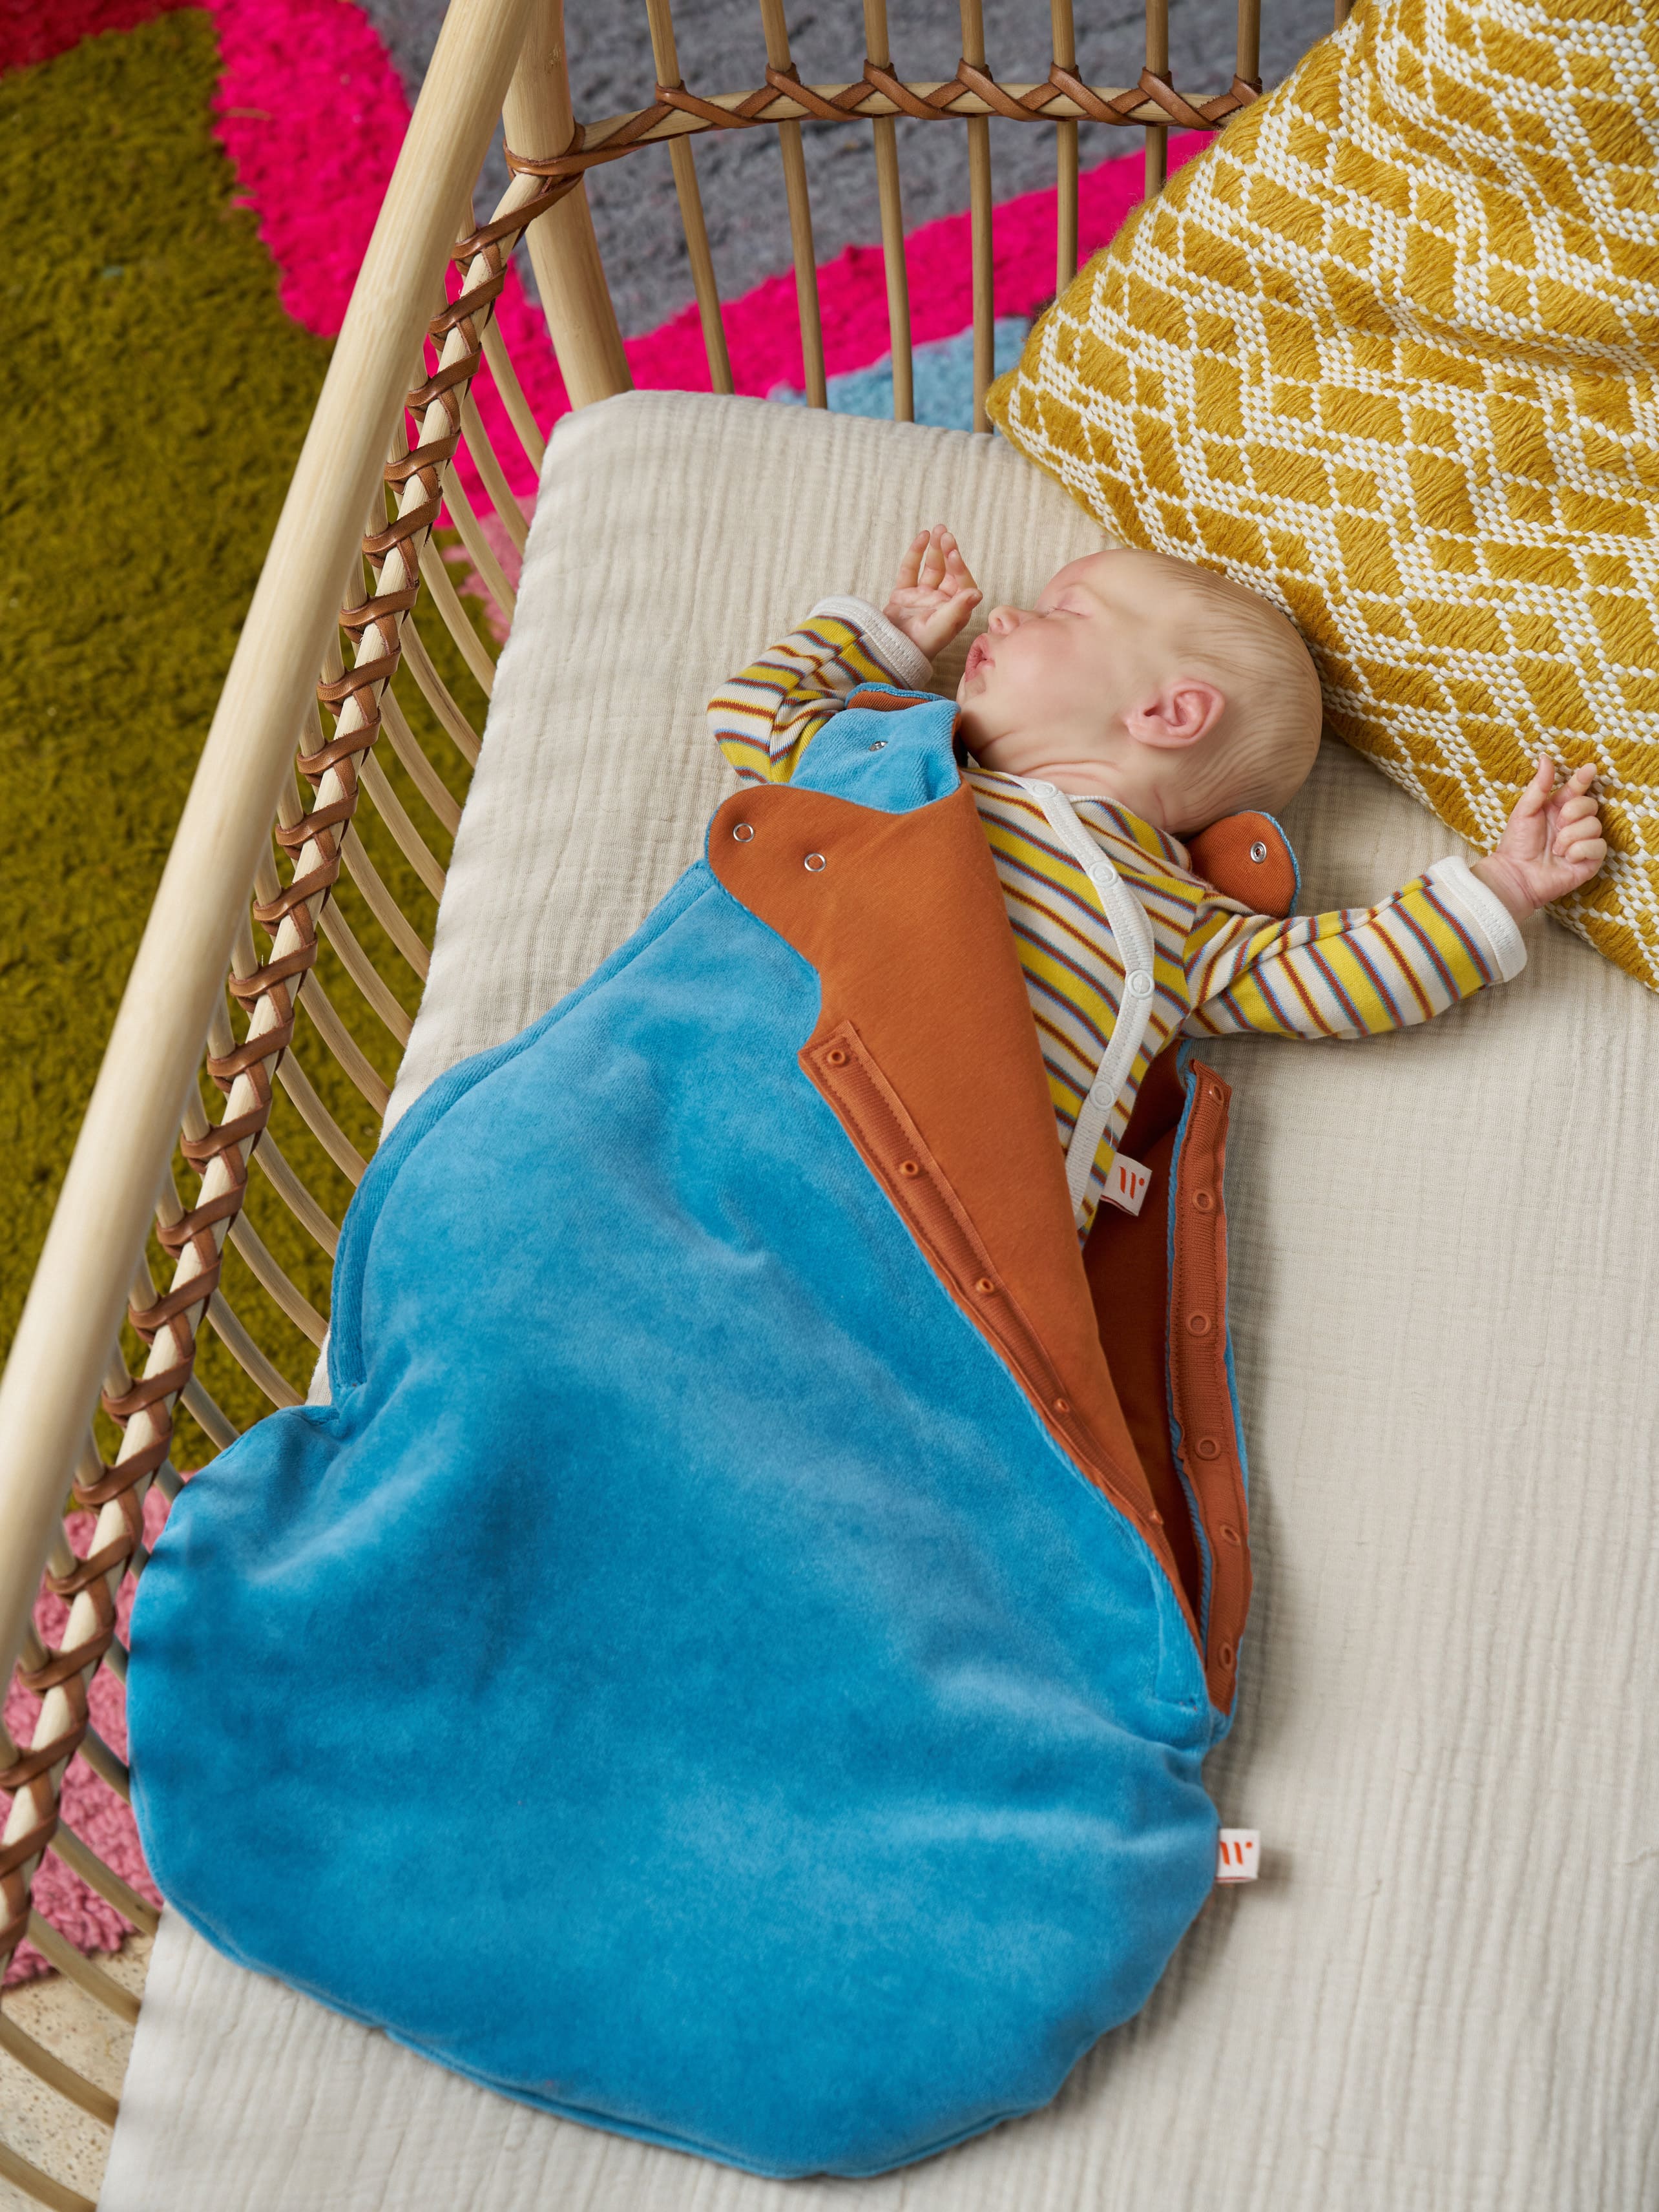 NEW - Shepherd - winter sleeping bag for premature babies, babies and children - up to size 116